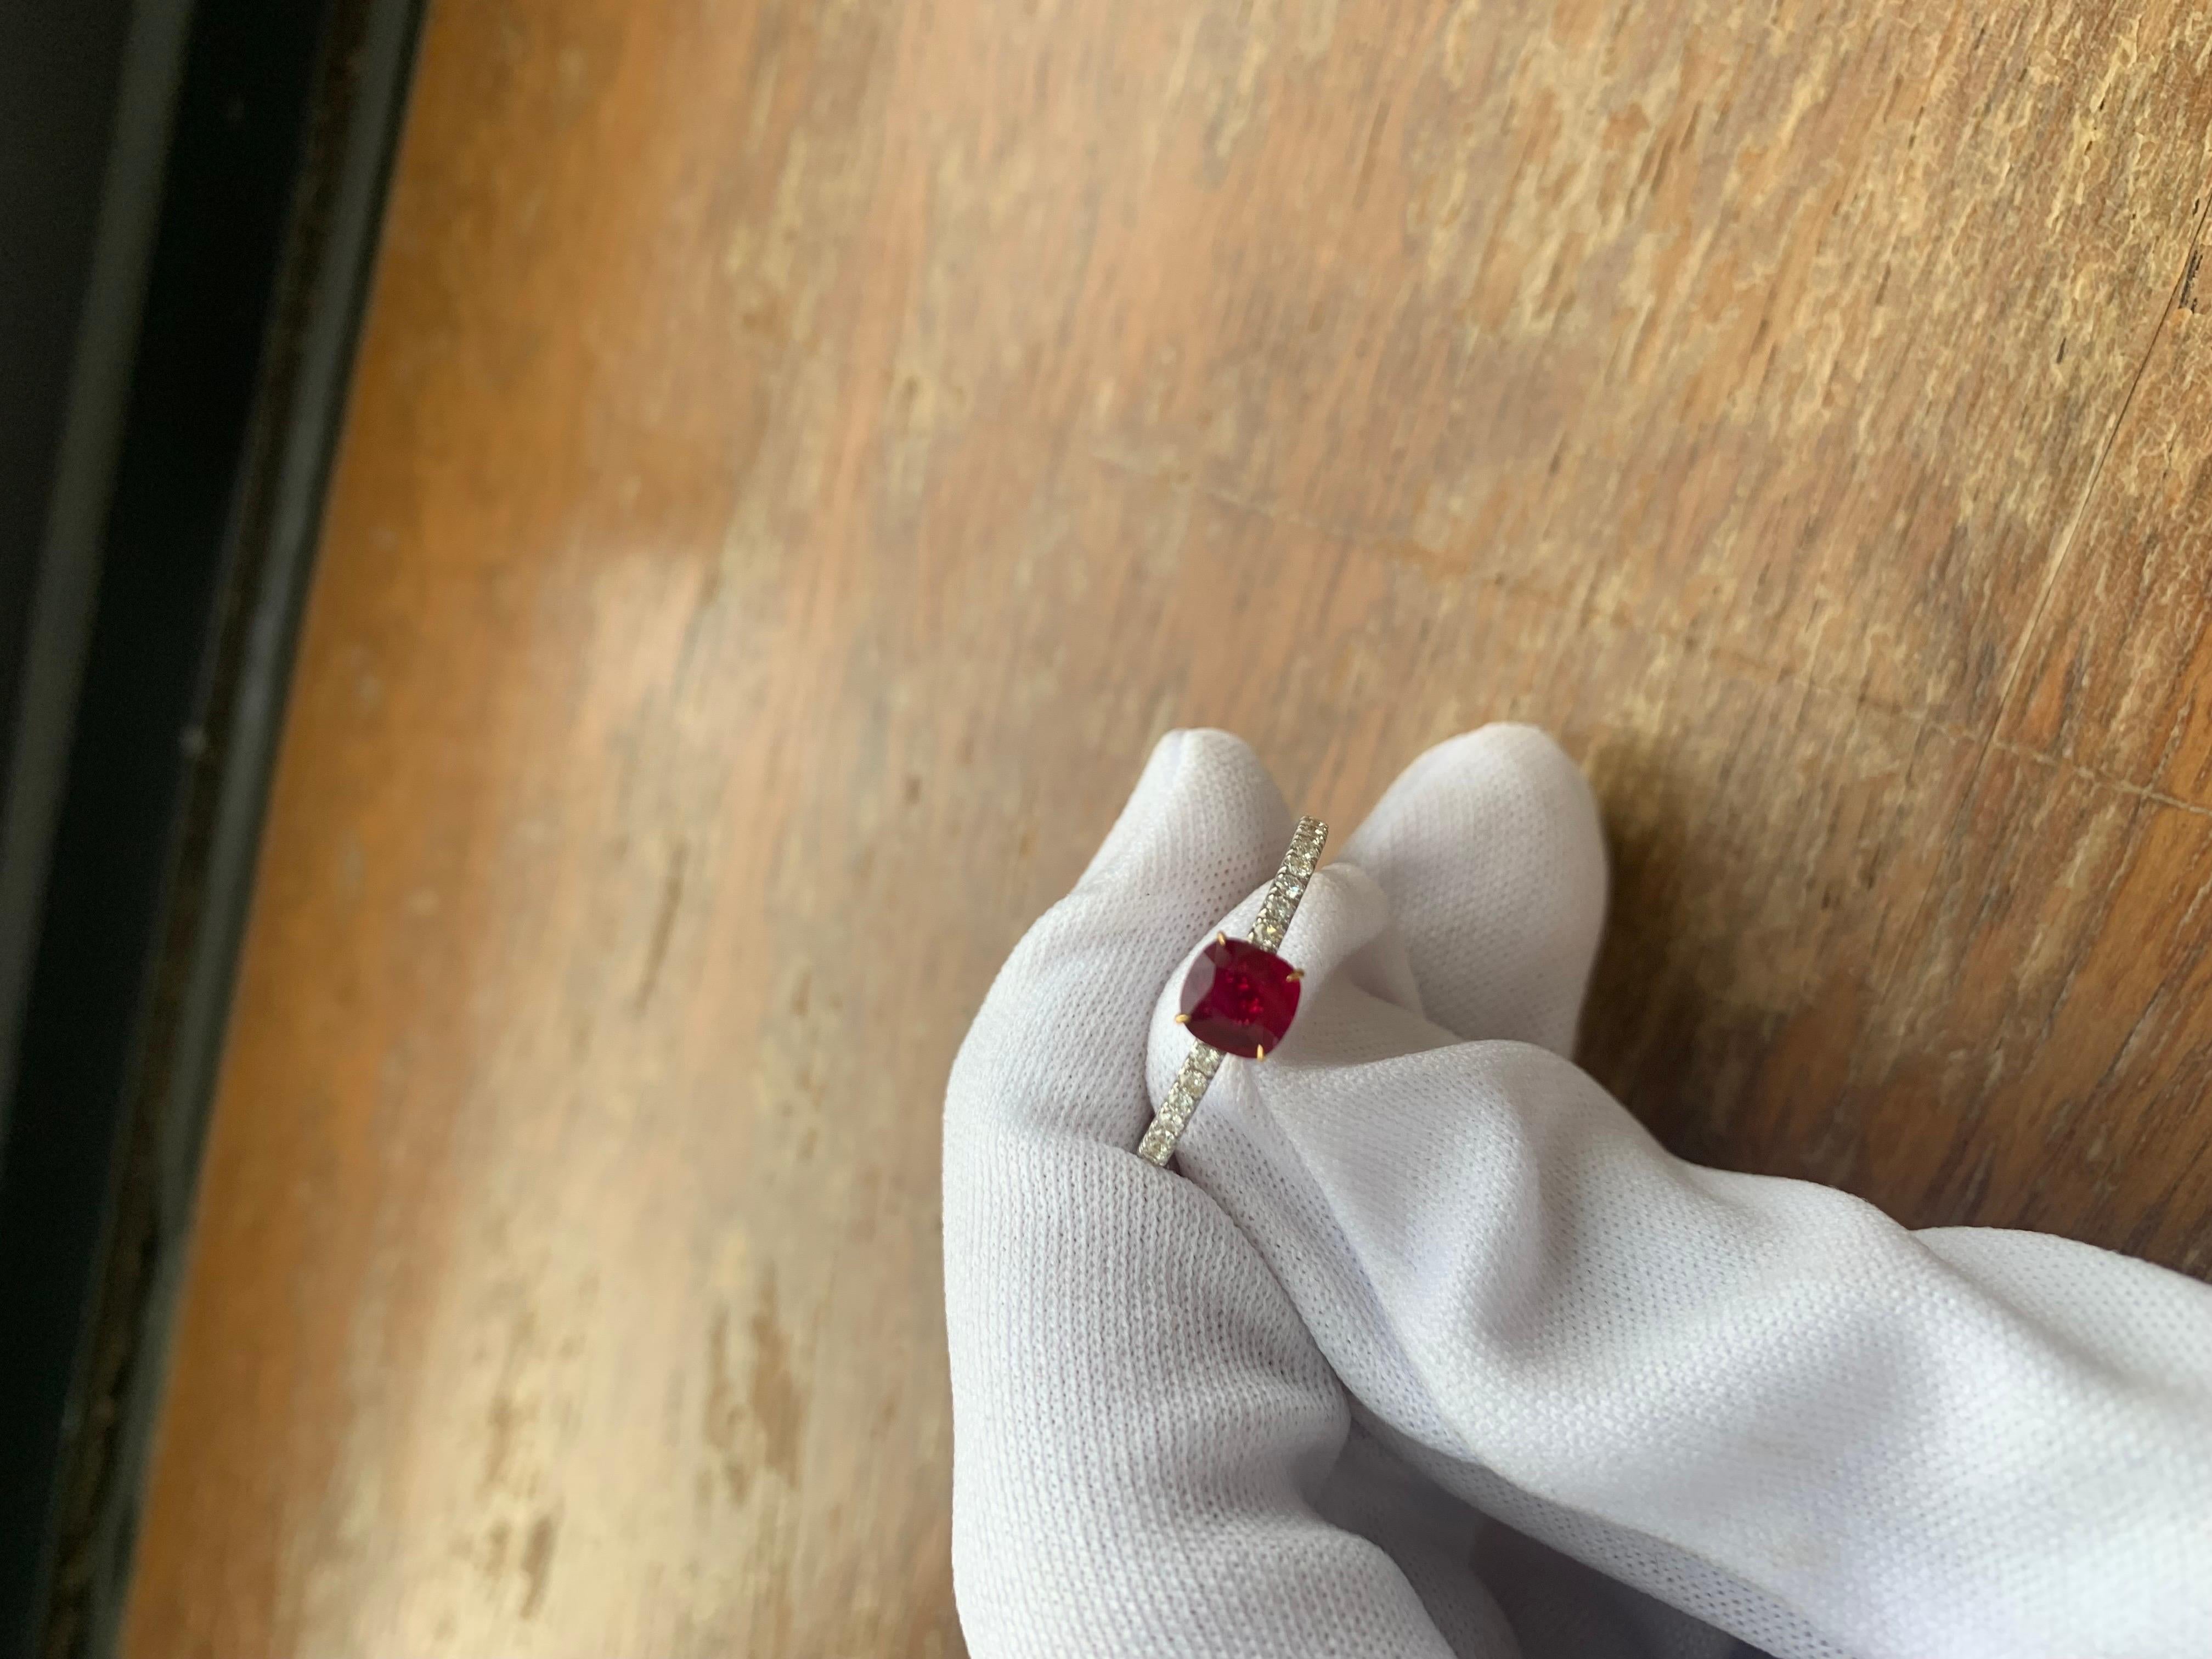 A brand new handcrafted ruby ring by Rewa Jewels. The ring's center stone is 0.73 carat Burmese ruby certified by Gem Research Swisslab (GRS) as natural, unheated, 'Pigeon blood' with the certificate number: 2021-120759. The piece has been set with